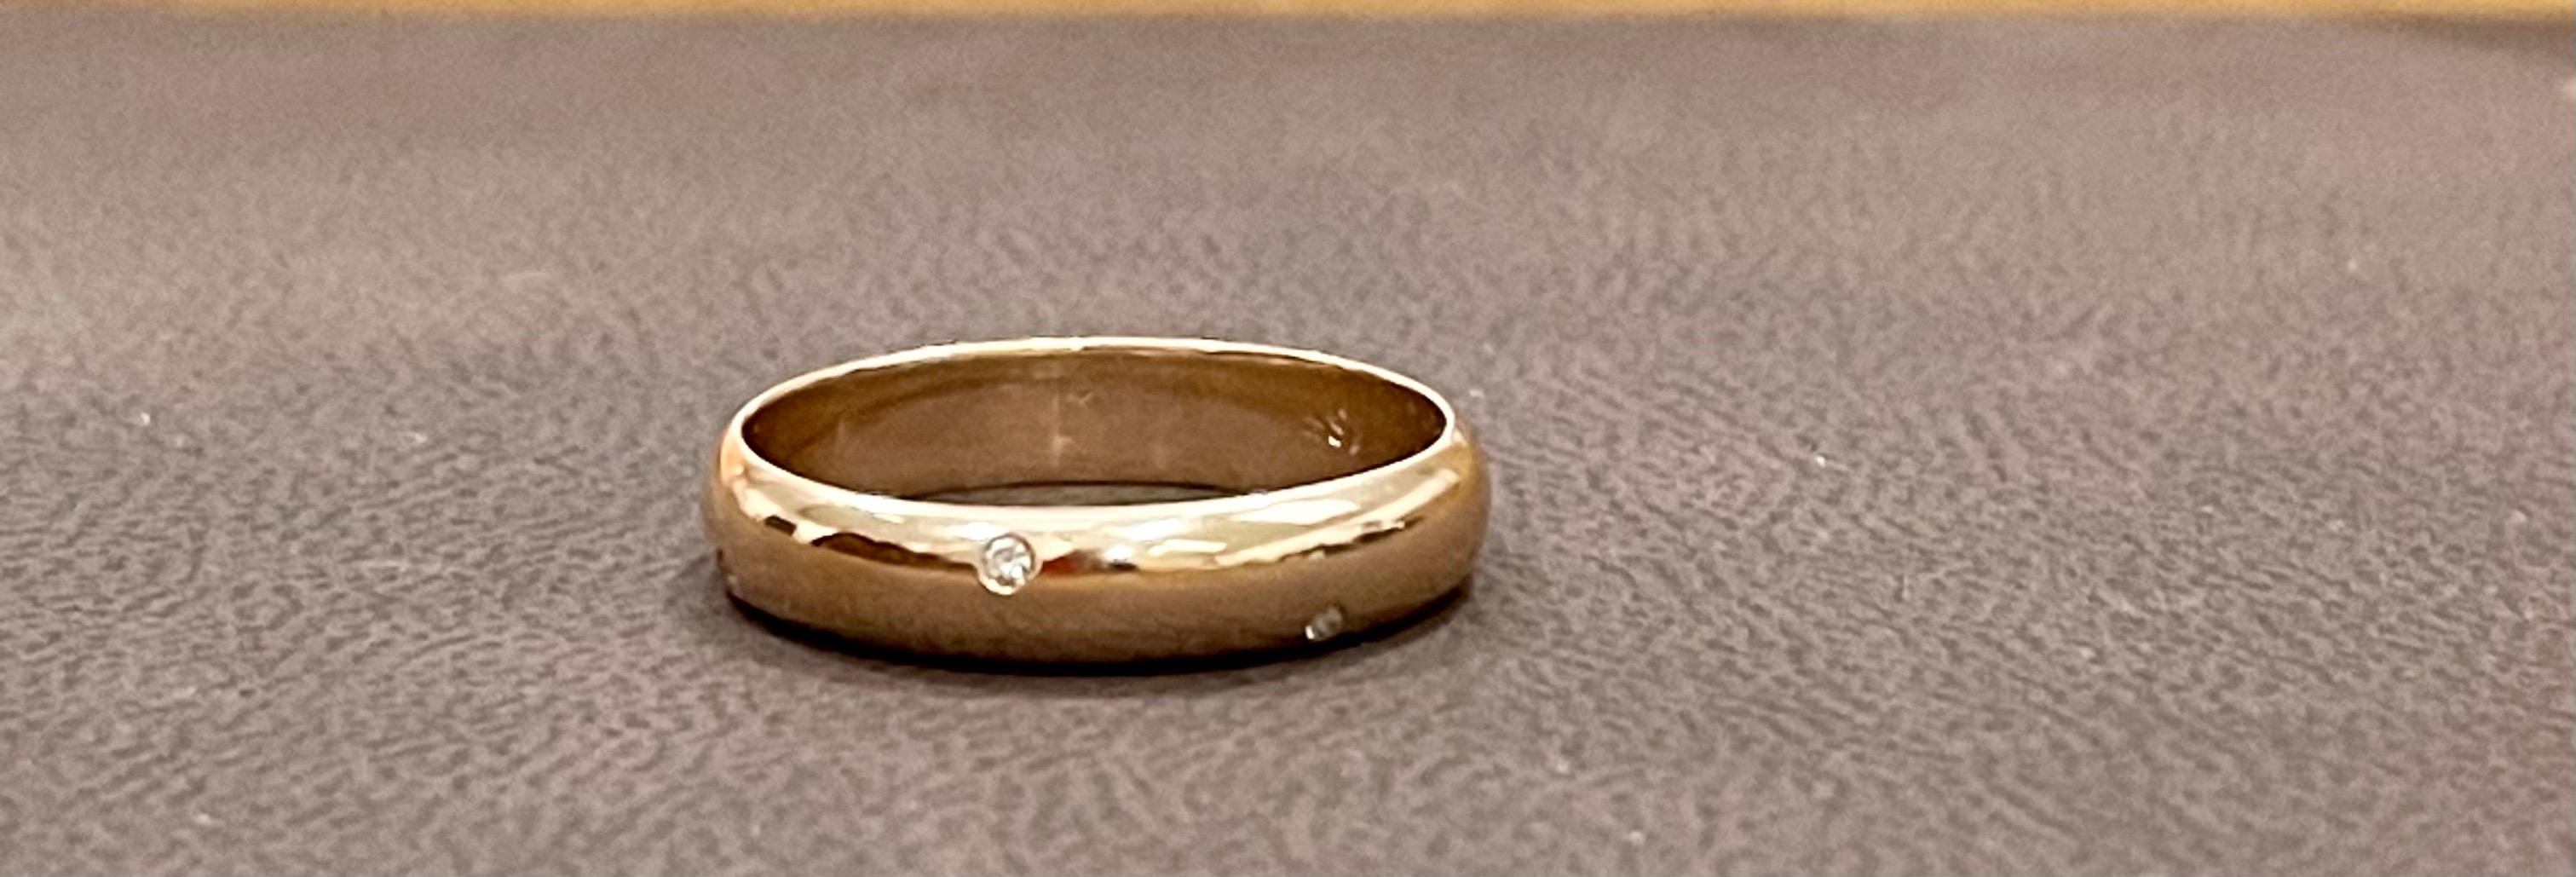 ring size 18 in india